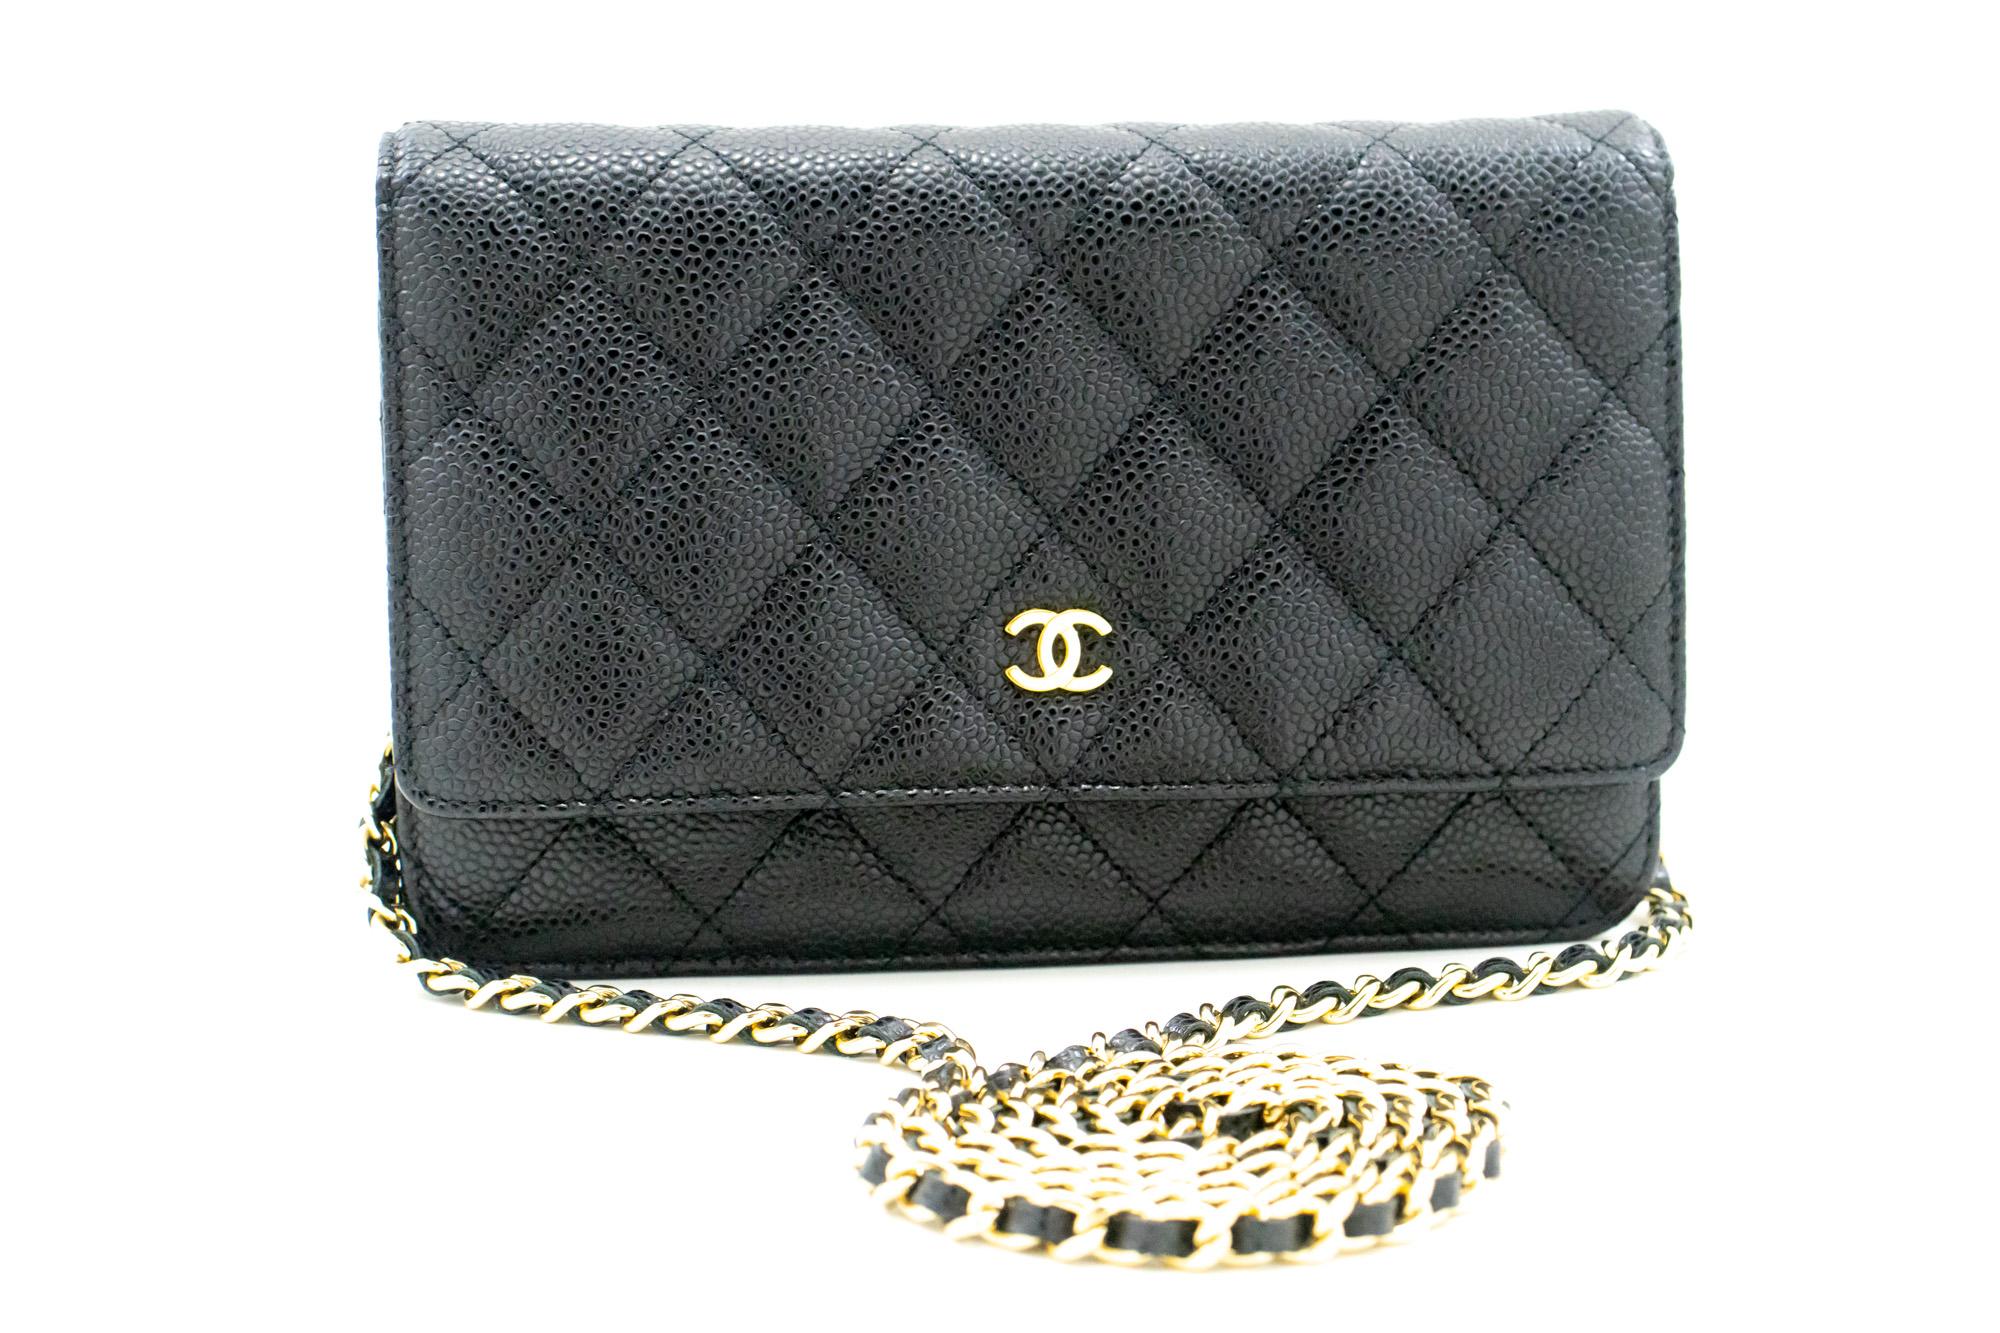 An authentic CHANEL Caviar Wallet On Chain WOC Black Shoulder Bag Crossbody. The color is Black. The outside material is Leather. The pattern is Solid. This item is Contemporary. The year of manufacture would be 2014.
Conditions & Ratings
Outside